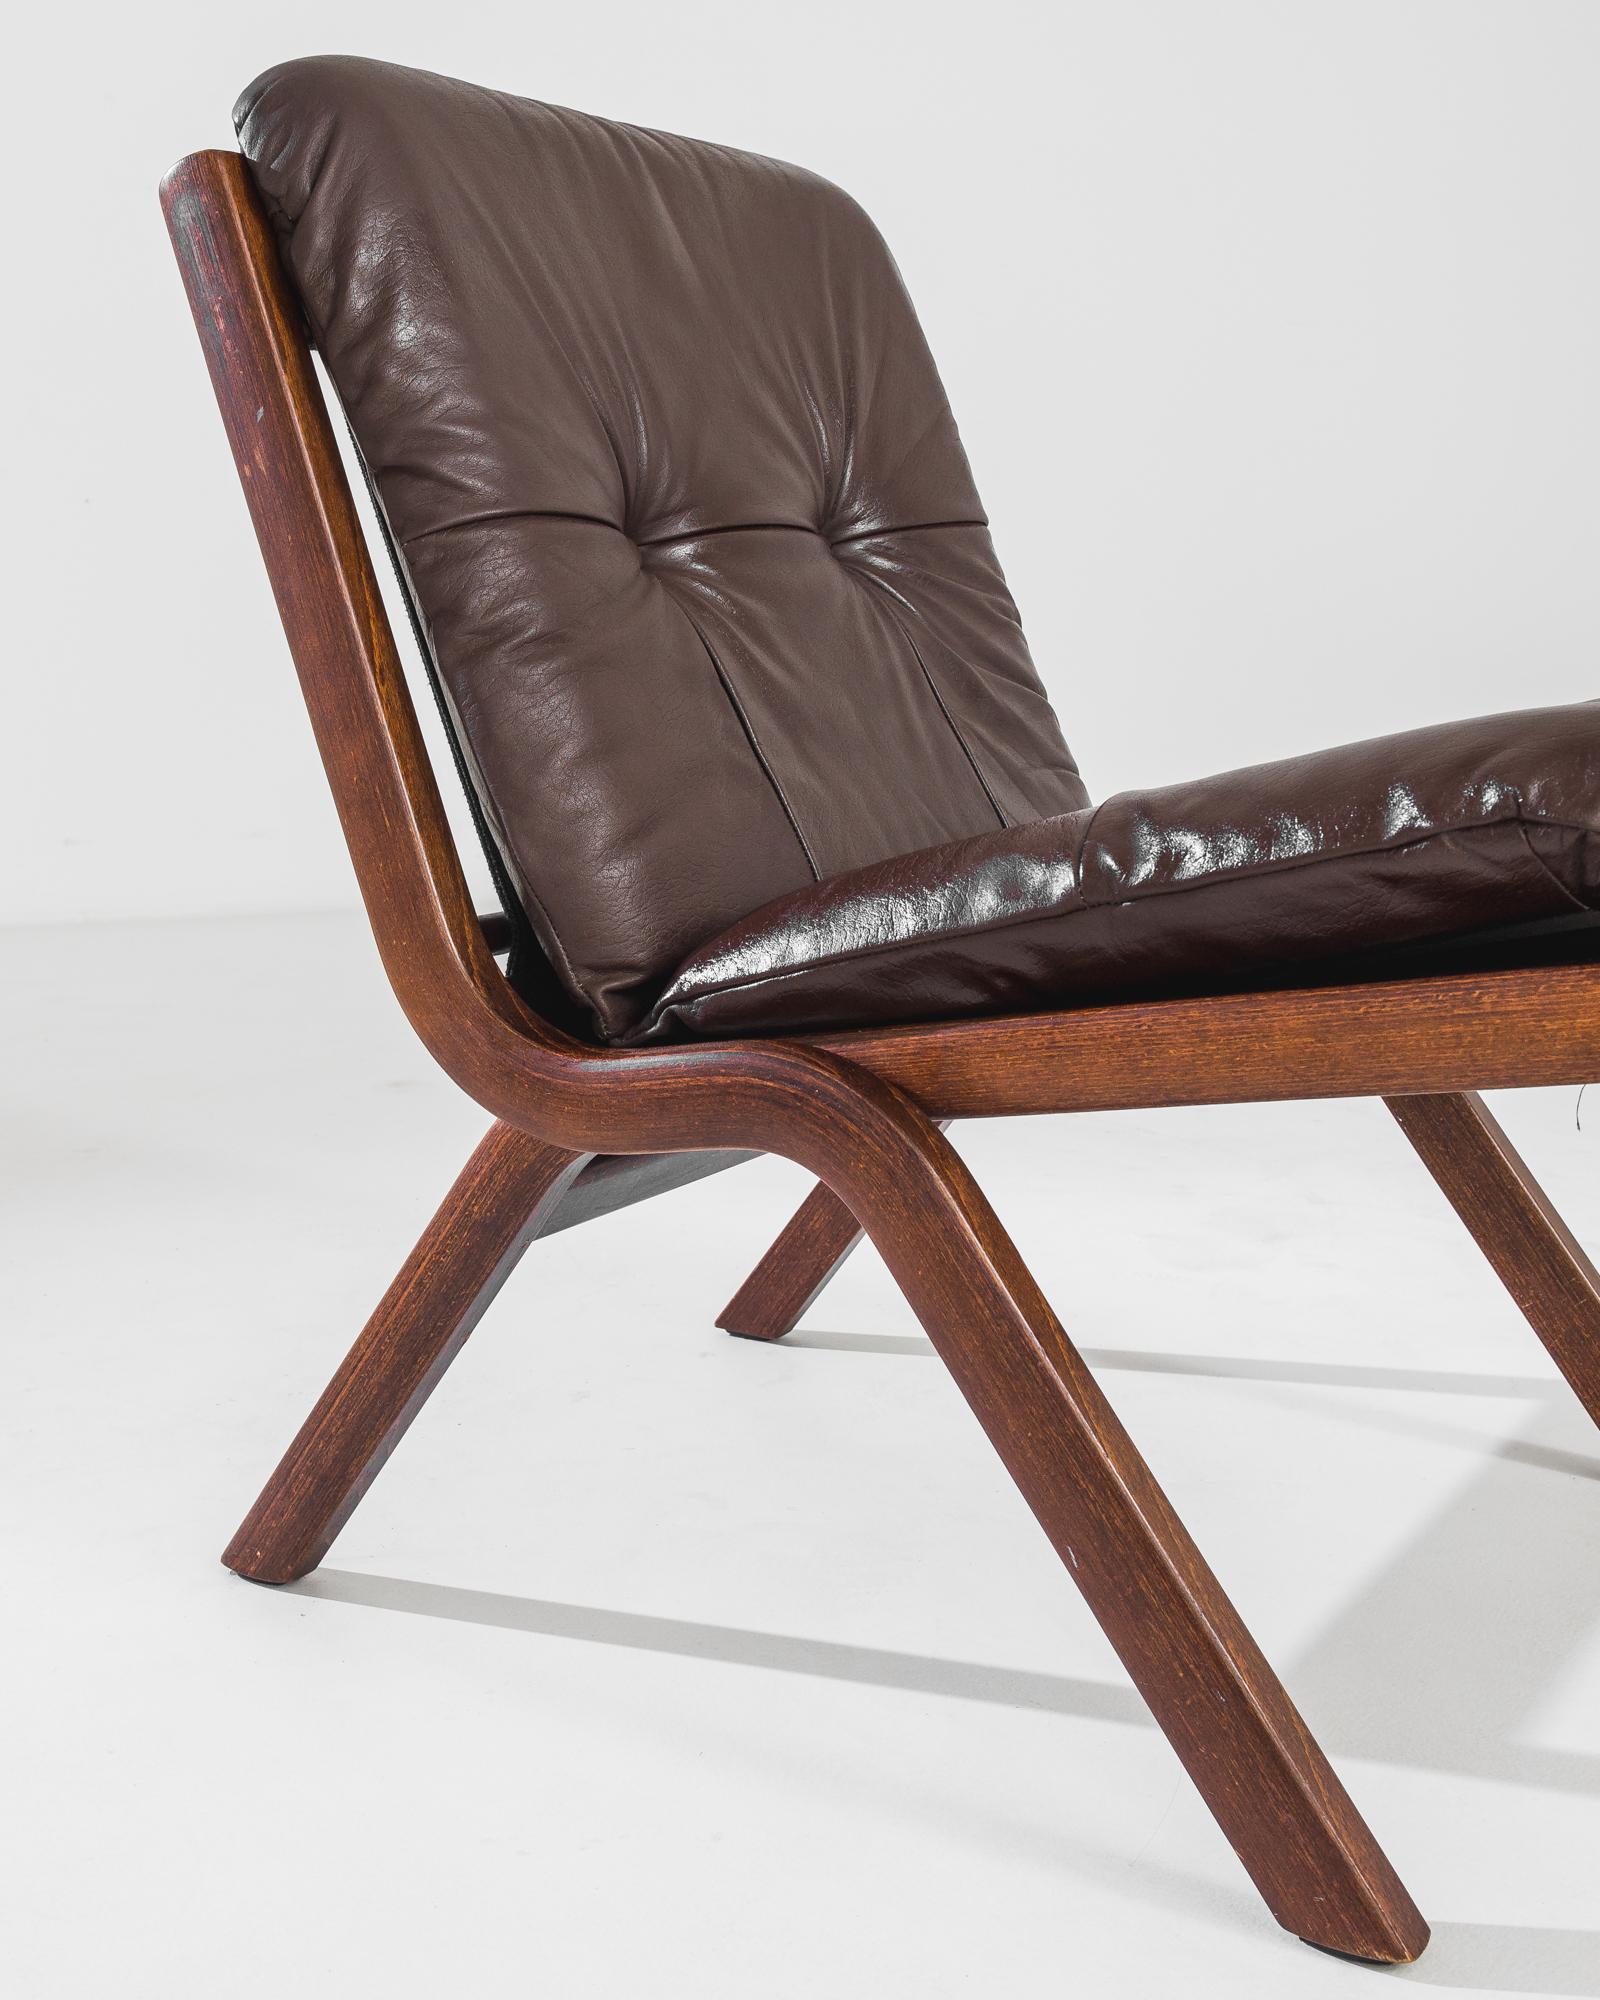 This vintage leather chair was produced in Norway, circa 1970. A wooden chair with upholstered leather back and seat, featuring a bentwood frame with rounded edges and splayed legs. The leather seat and back are in a rich chocolate tone,